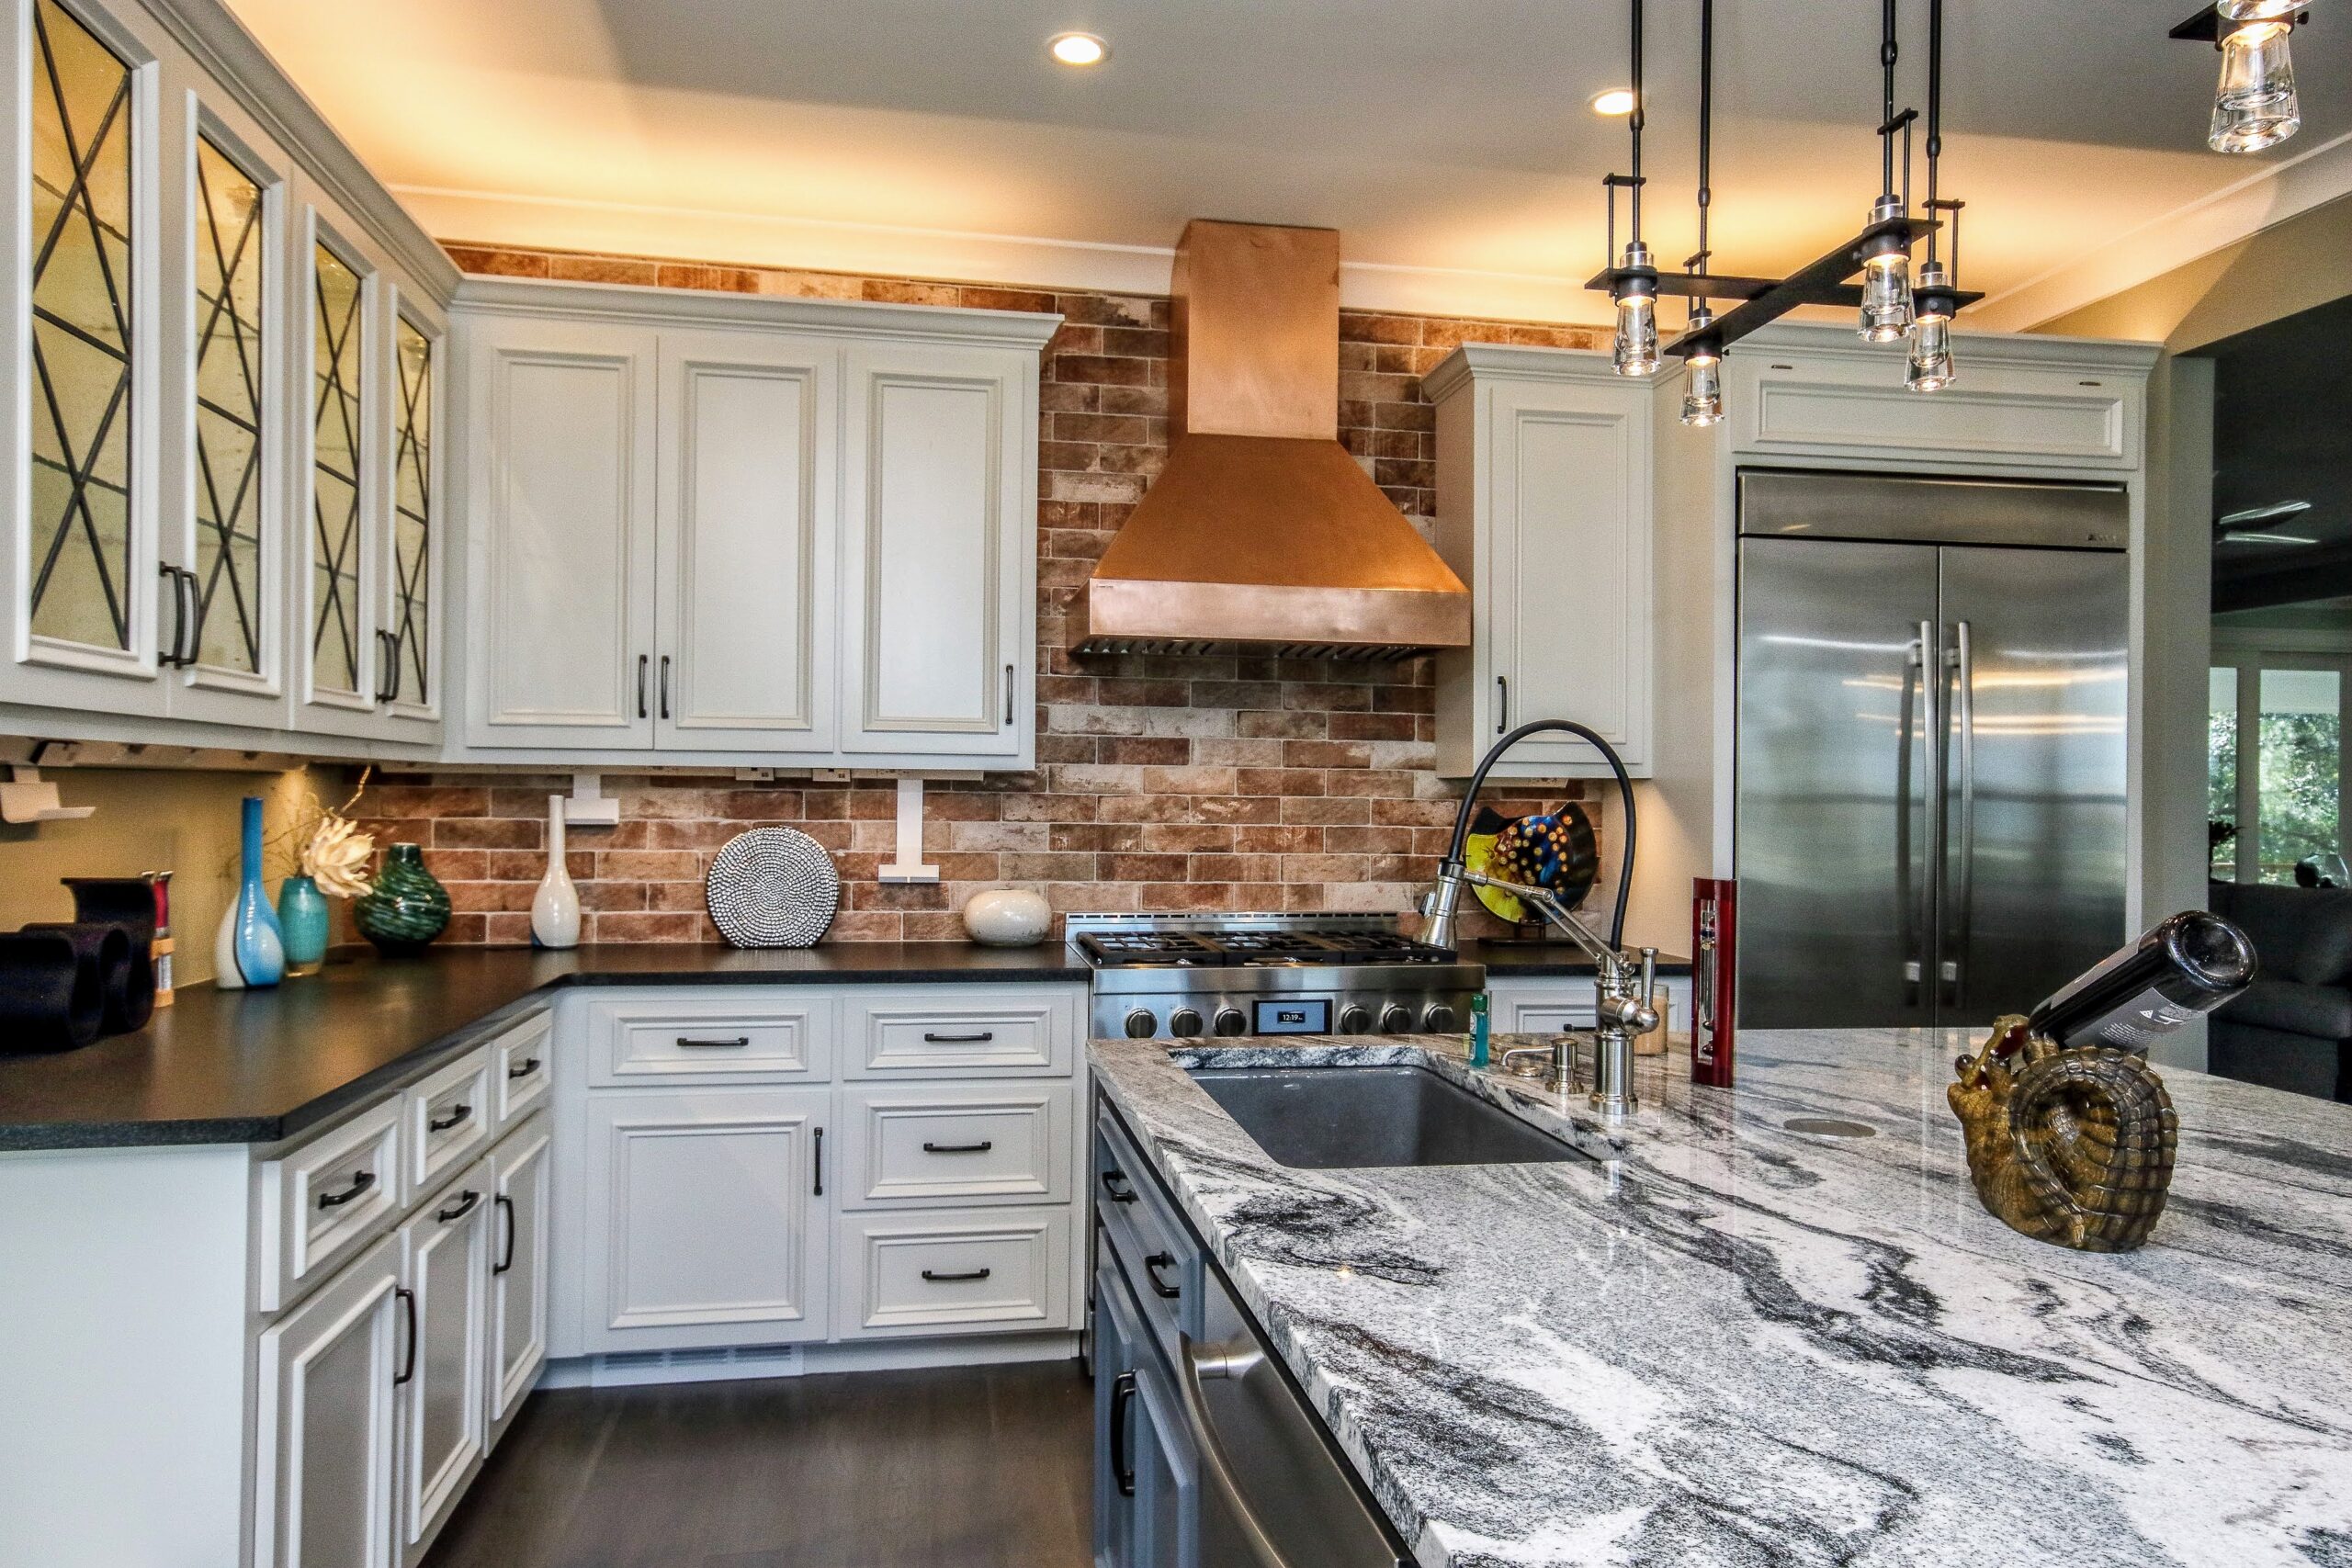 Home Remodeling - kitchen with white granite countertops CK Contracting - Home Renovations - Mount Pleasant, SC.